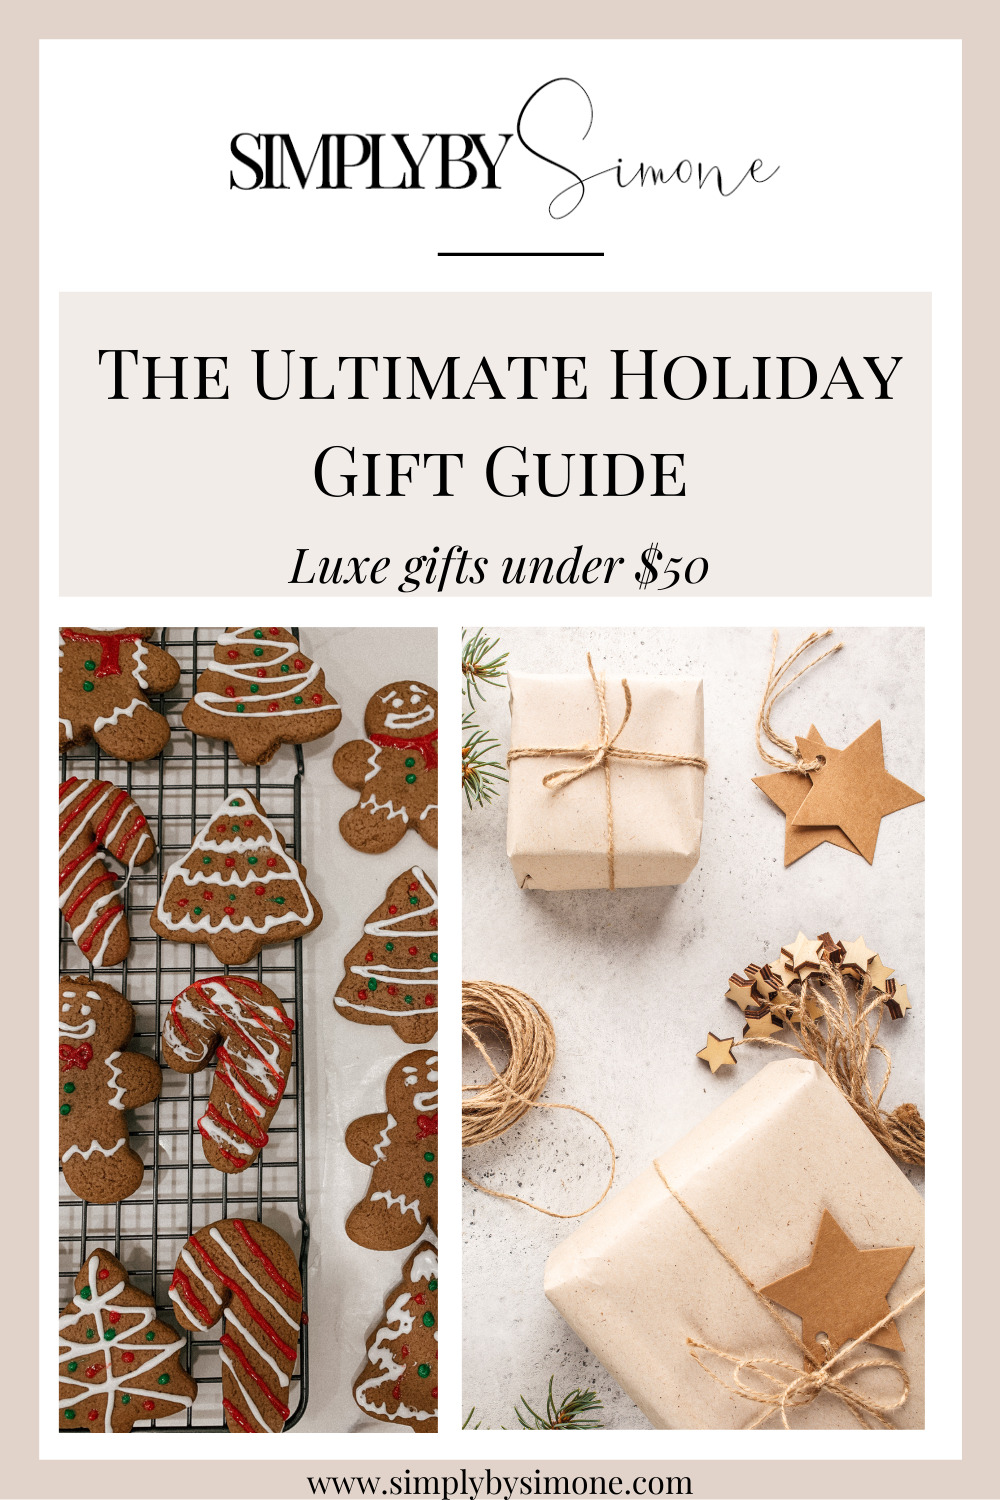 Christmas Shopping Guide: Gifts for Her Under $50